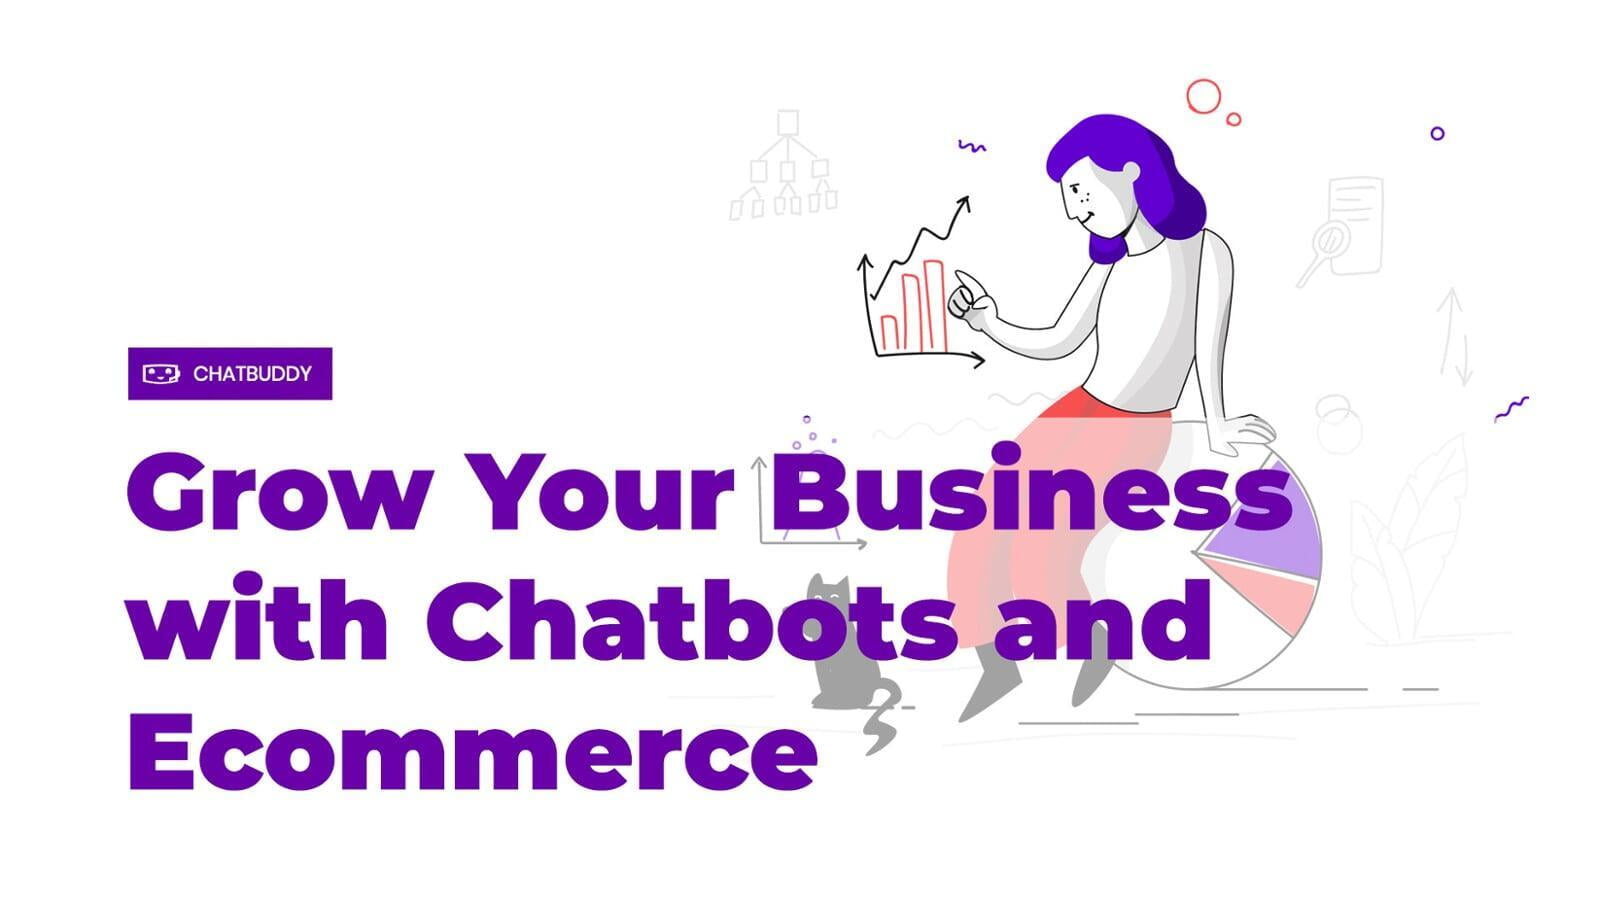 Grow Your Business with Chatbots and Ecommerce